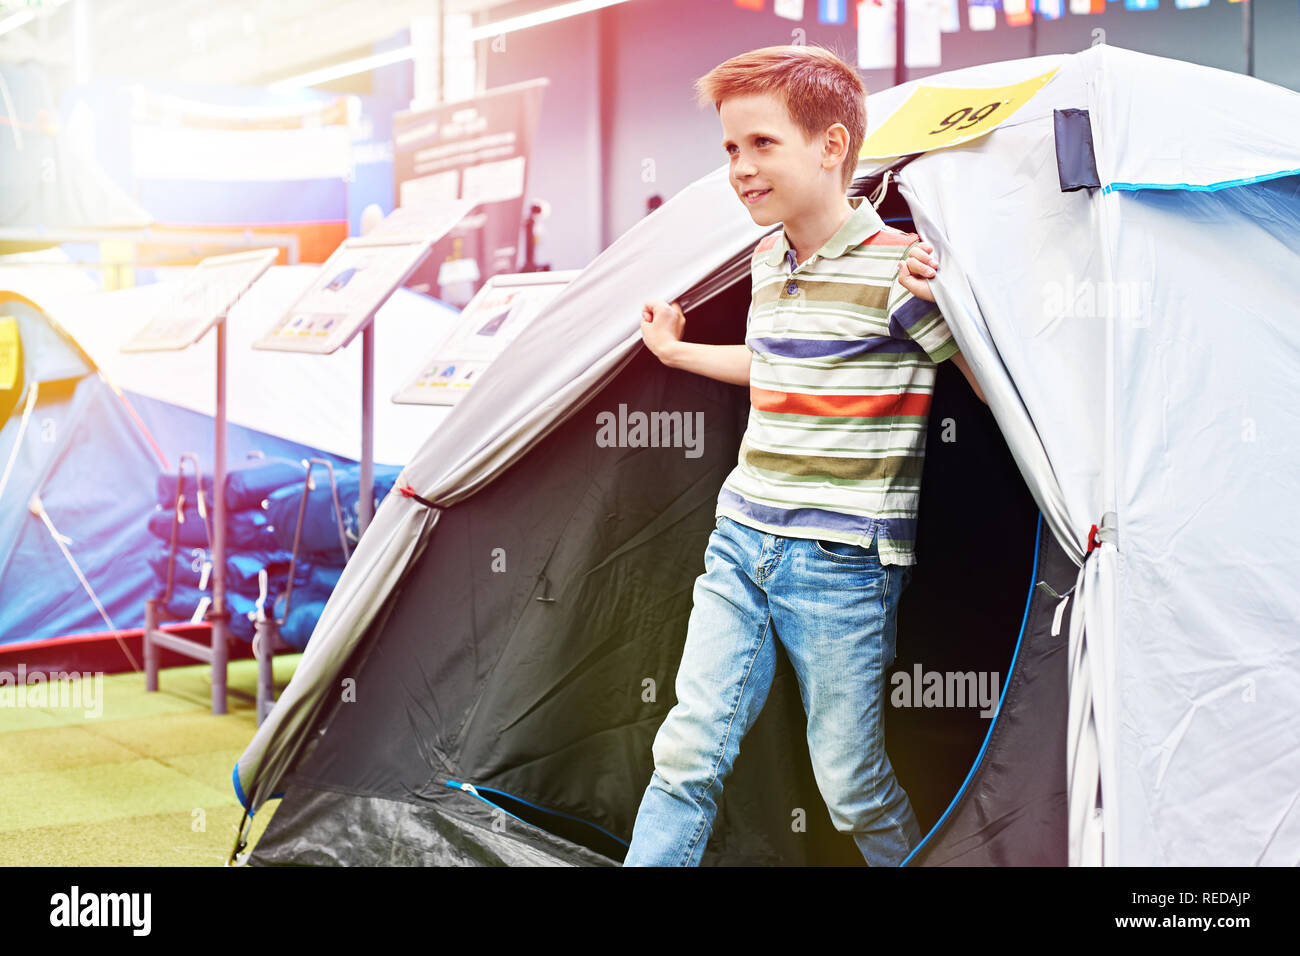 Boy in a tourist tent in a sports shop Stock Photo